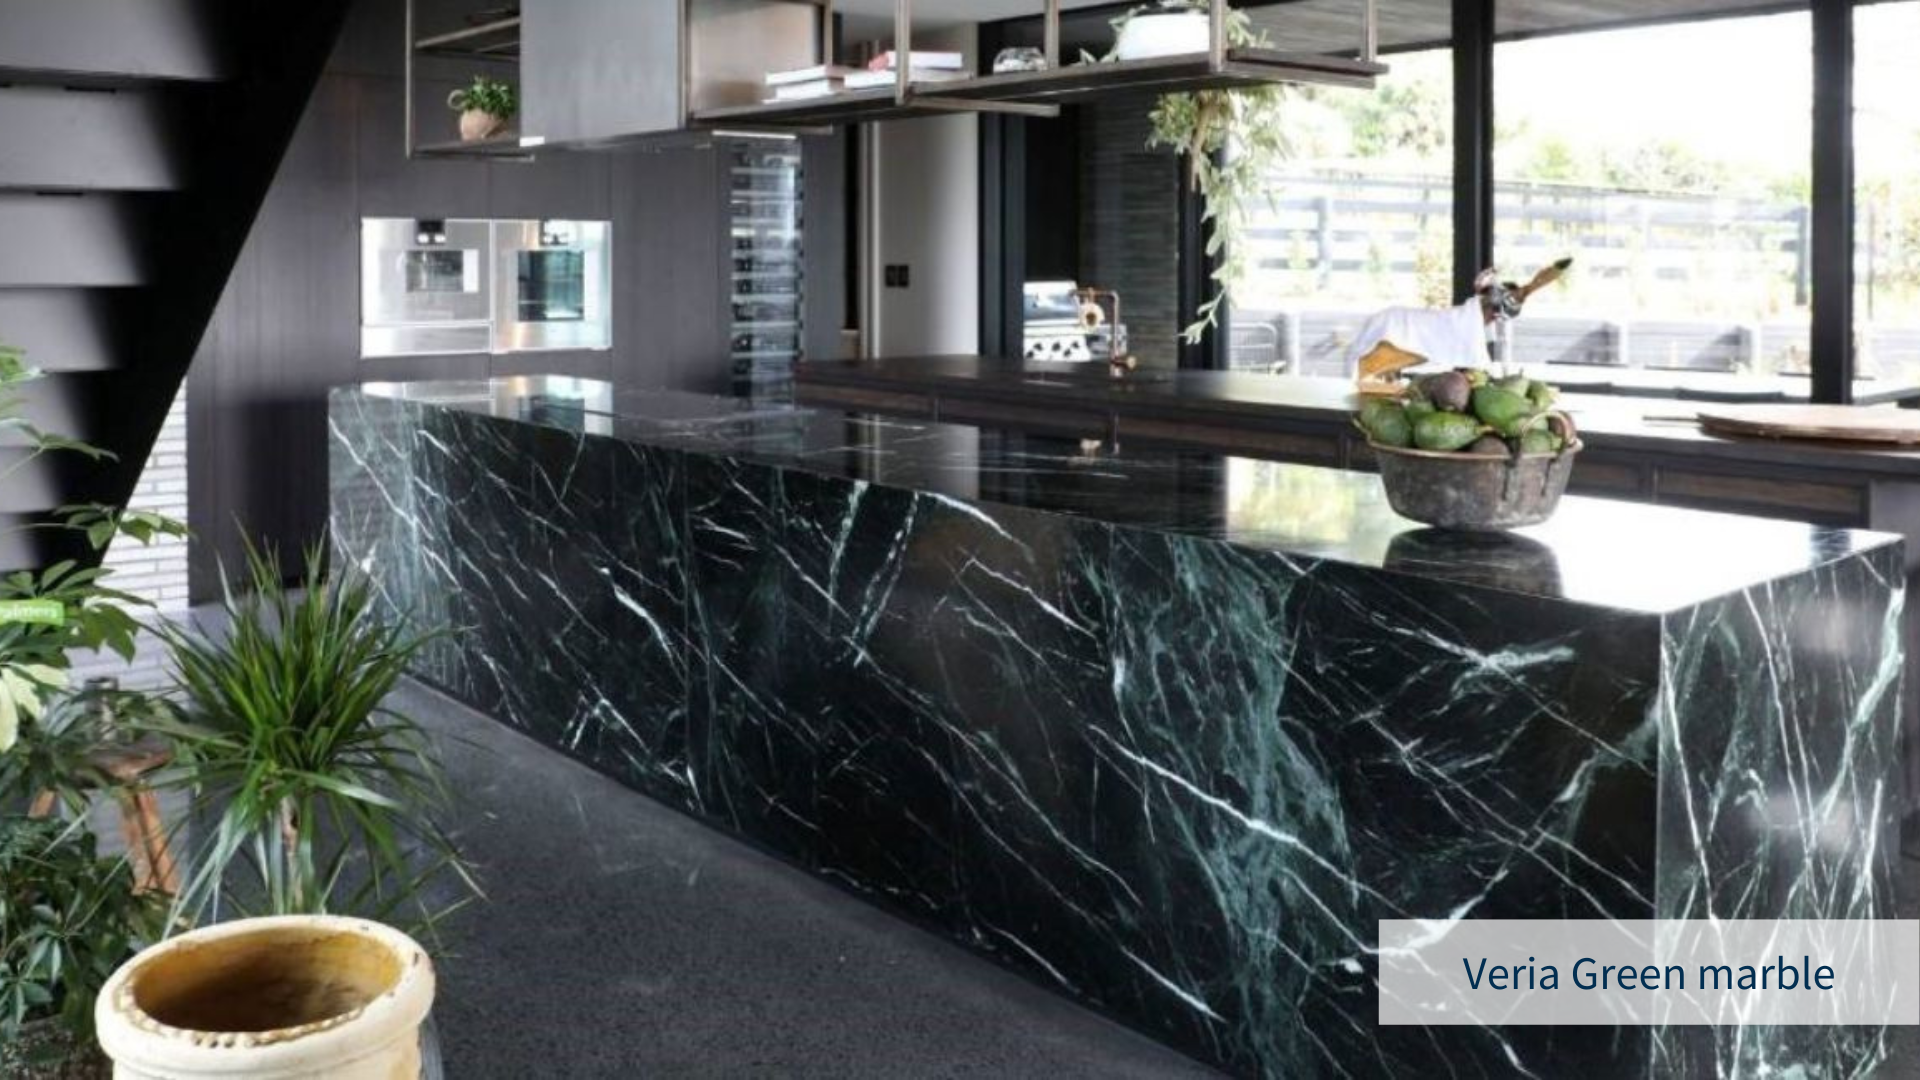 Modern kitchen rendering with veria green marble countertops, combined with dark wood in the cabinets and green elements, plants and minimal decor